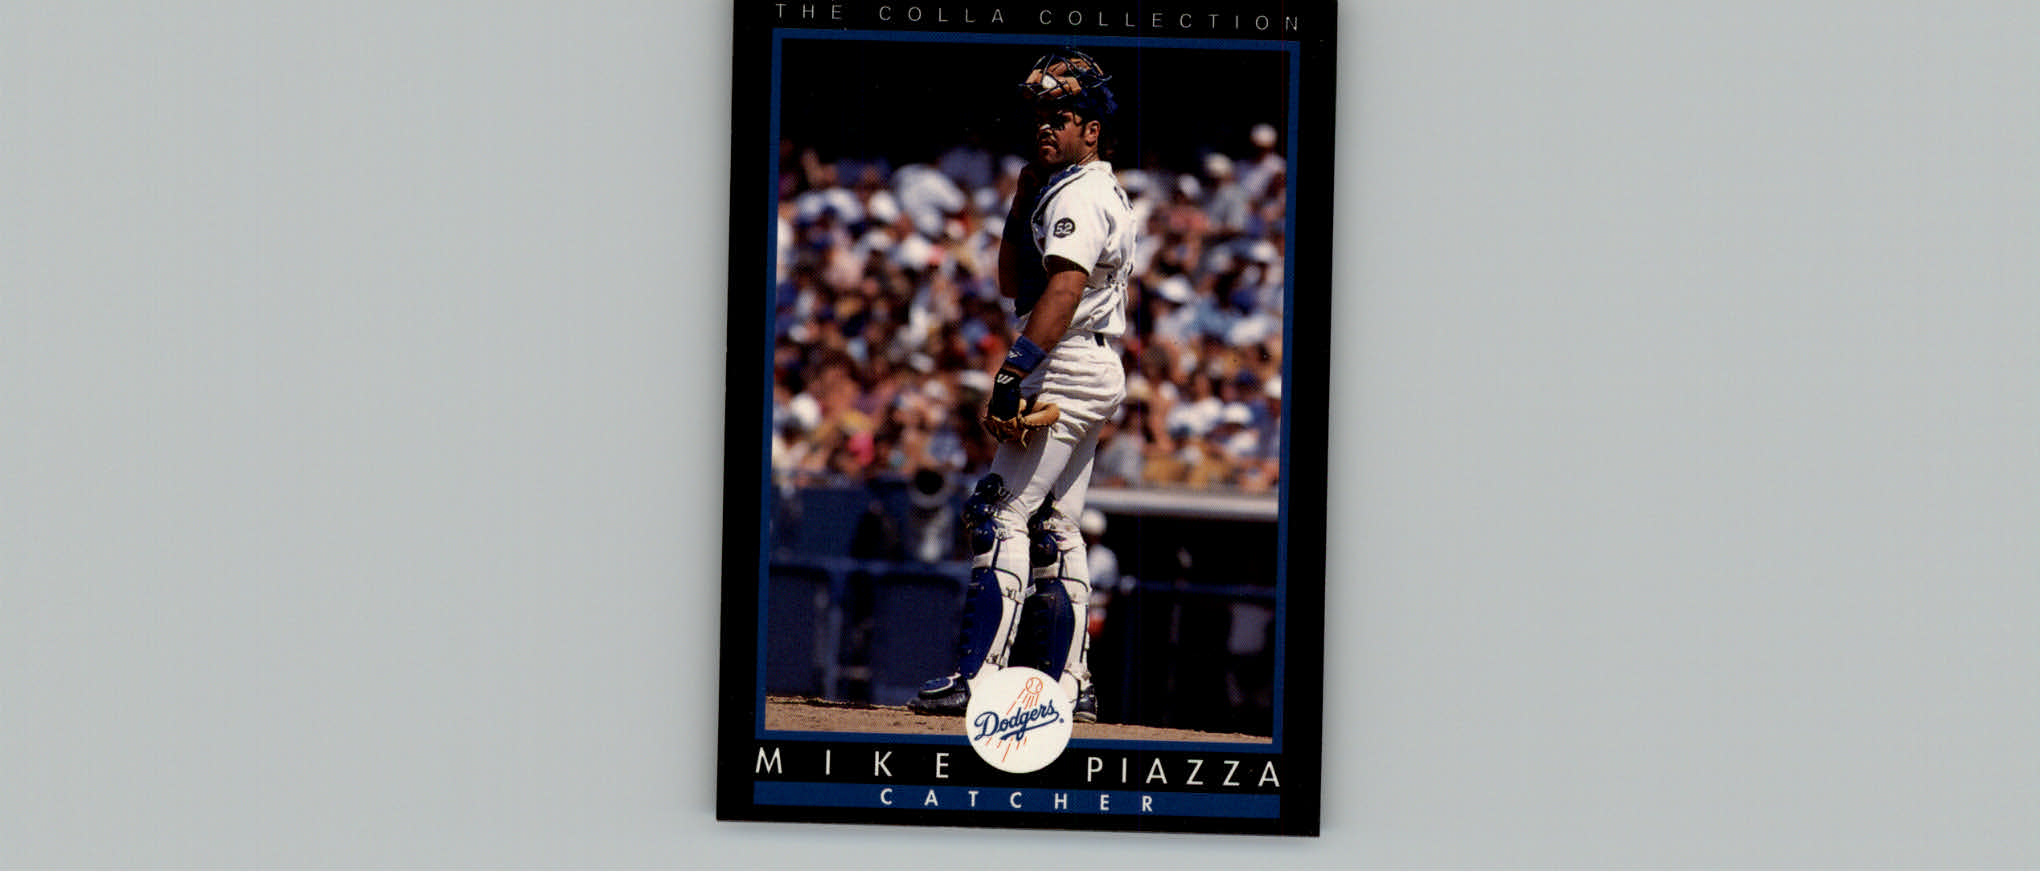 1993 Colla All-Star Game #24 Mike Piazza